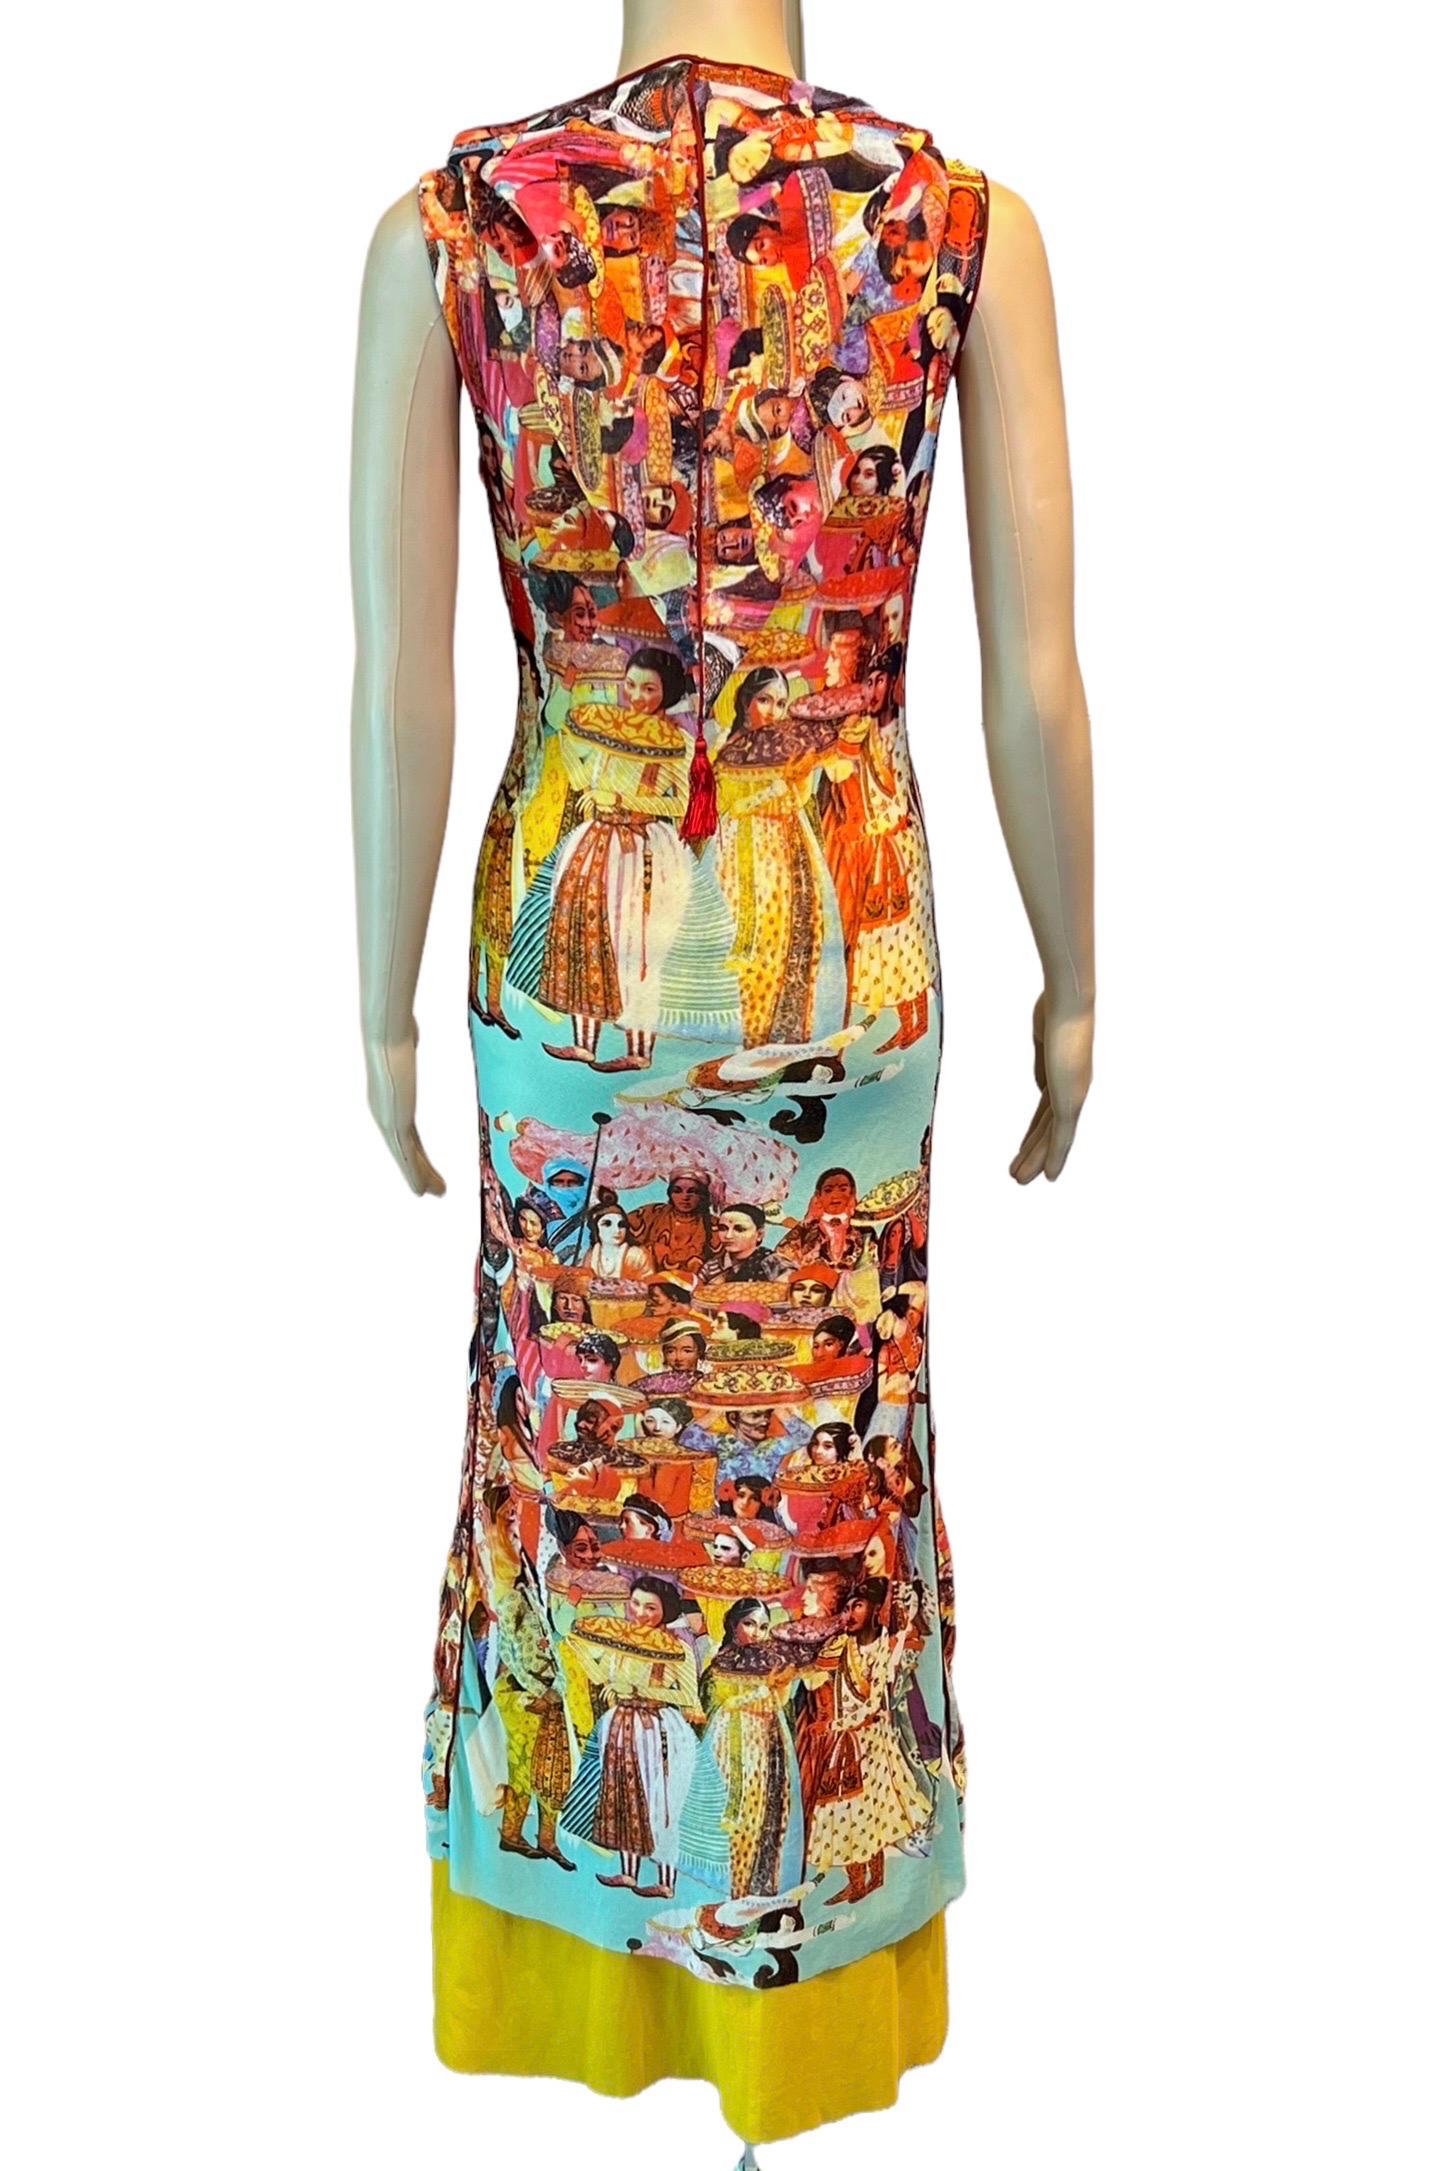 Jean Paul Gaultier Soleil Vintage Faces People Print Hooded Mesh Maxi Dress In Good Condition For Sale In Naples, FL